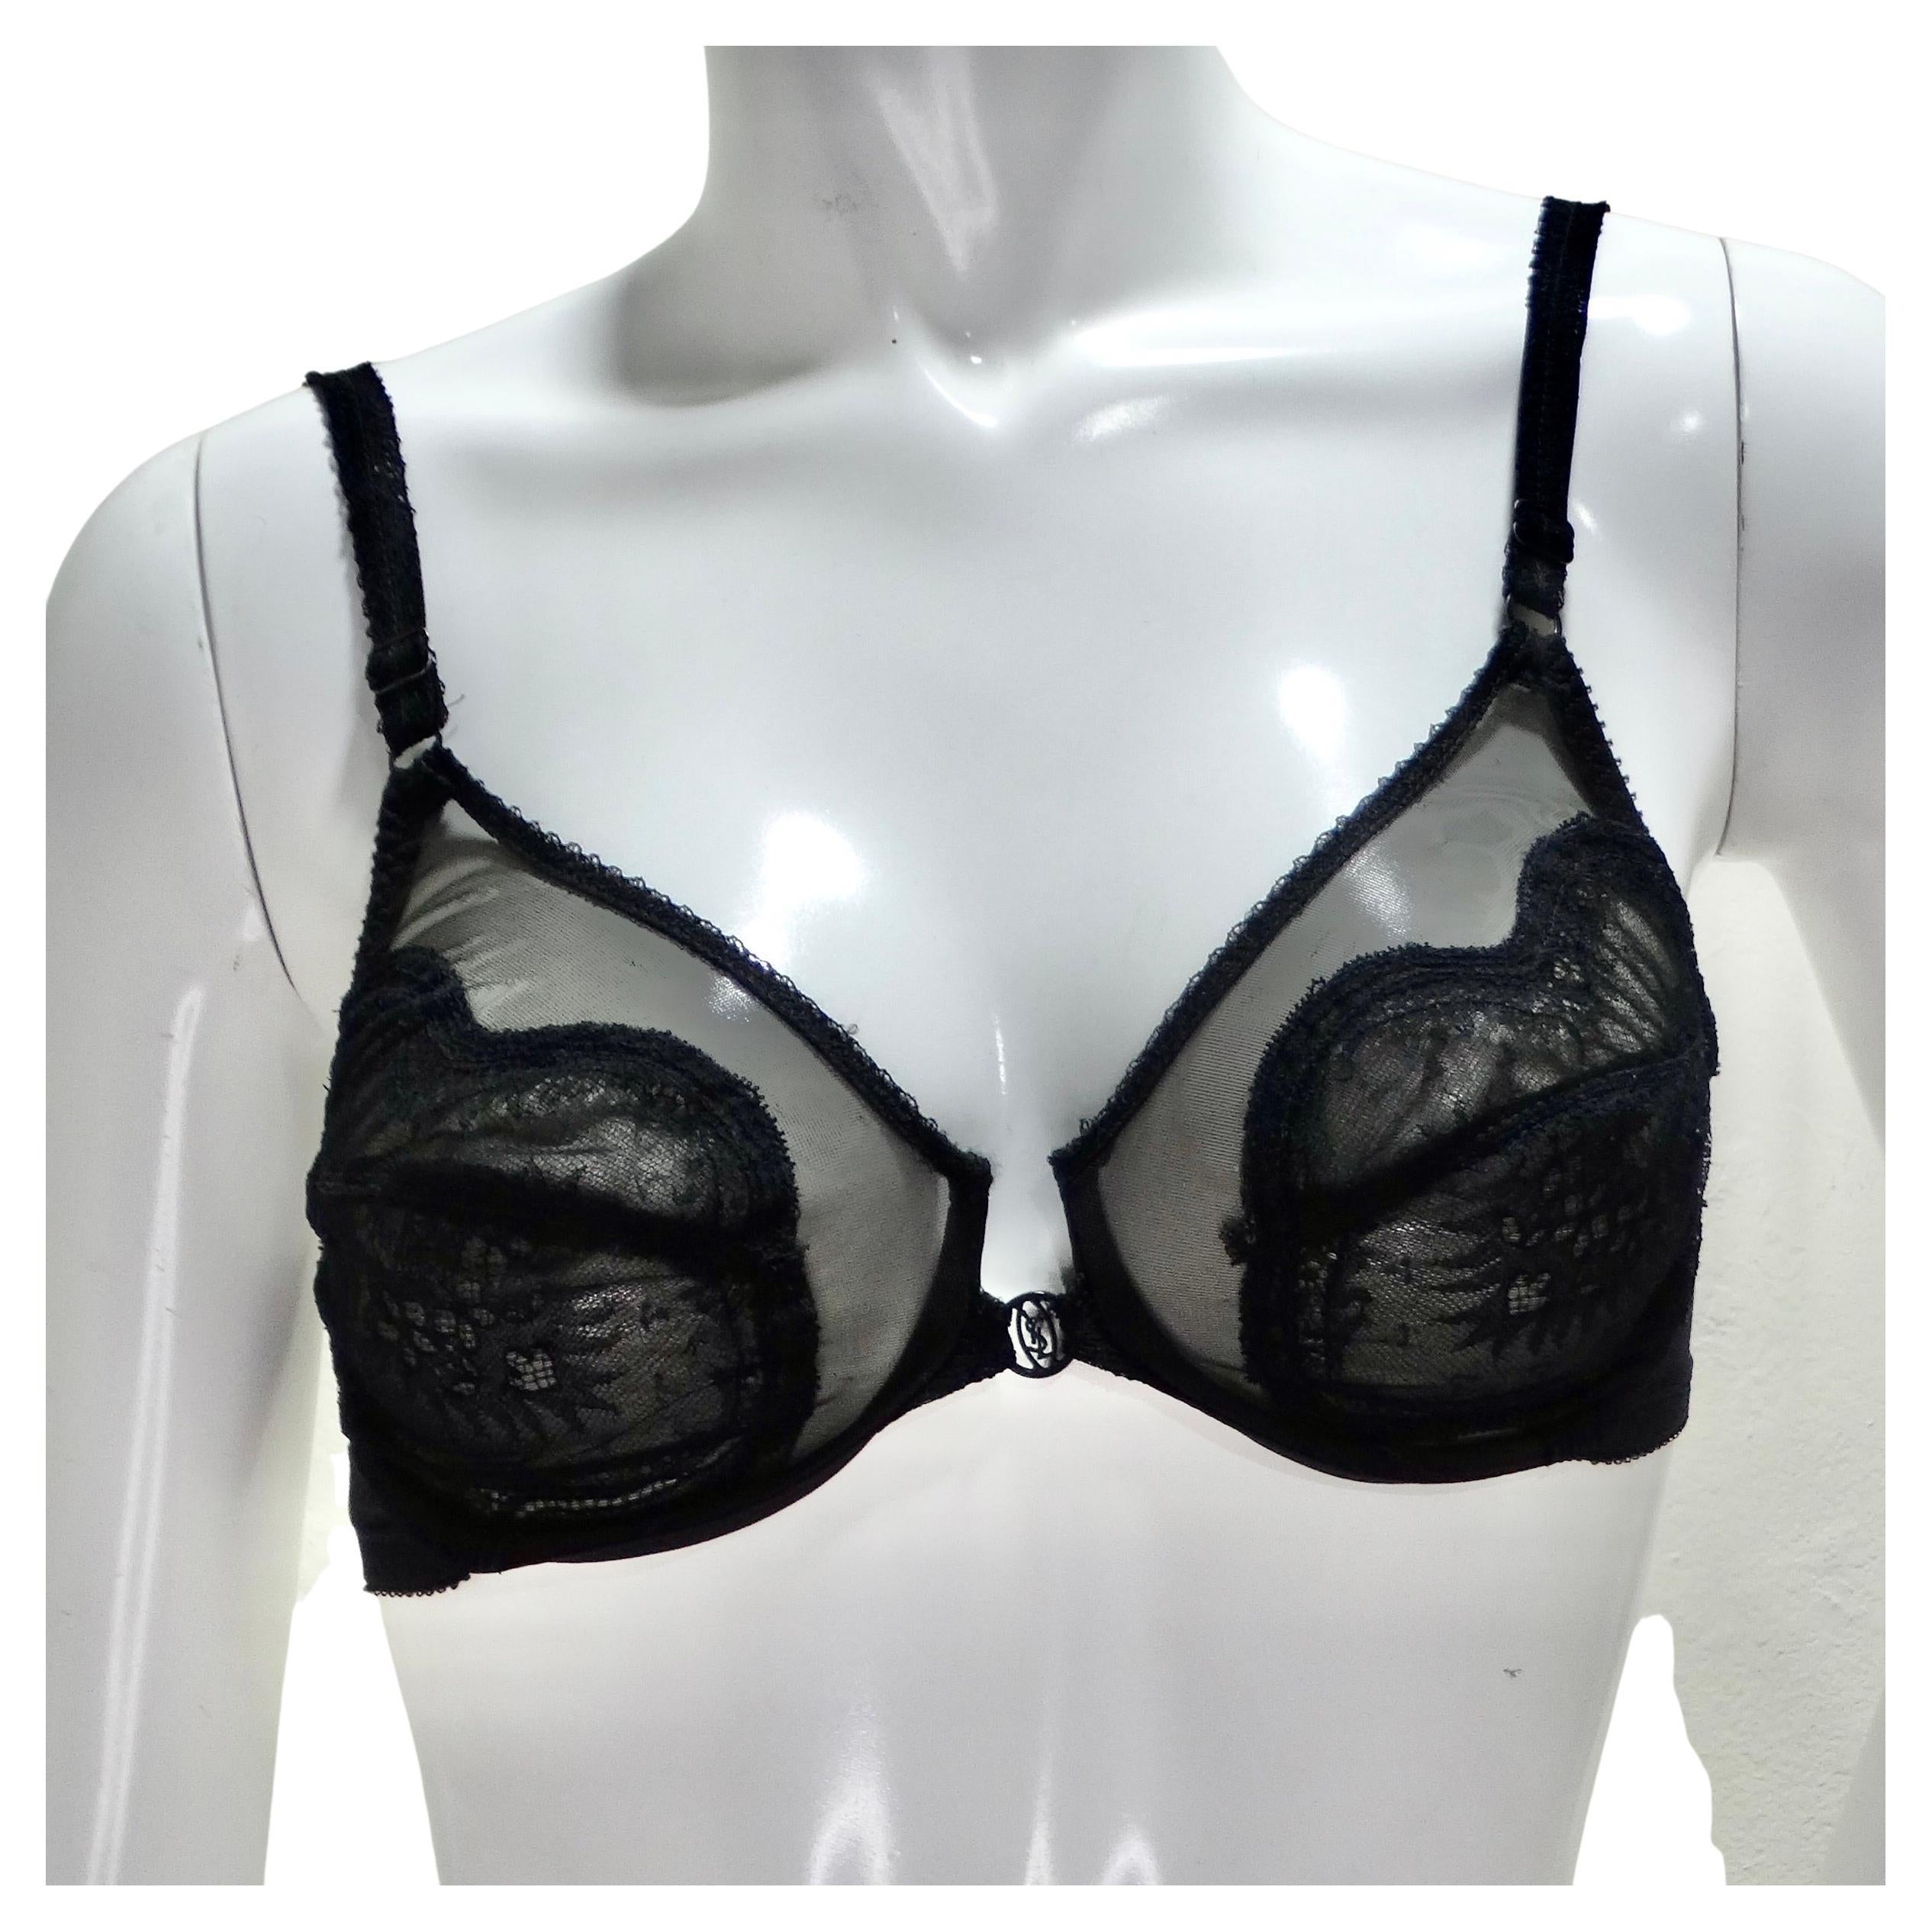 Step into a world of timeless elegance with this 1970s Yves Saint Laurent Black Lace Bra. Crafted with exquisite attention to detail, this classic style underwire bra features gorgeous black lace that exudes femininity and elegance. Indulge in the